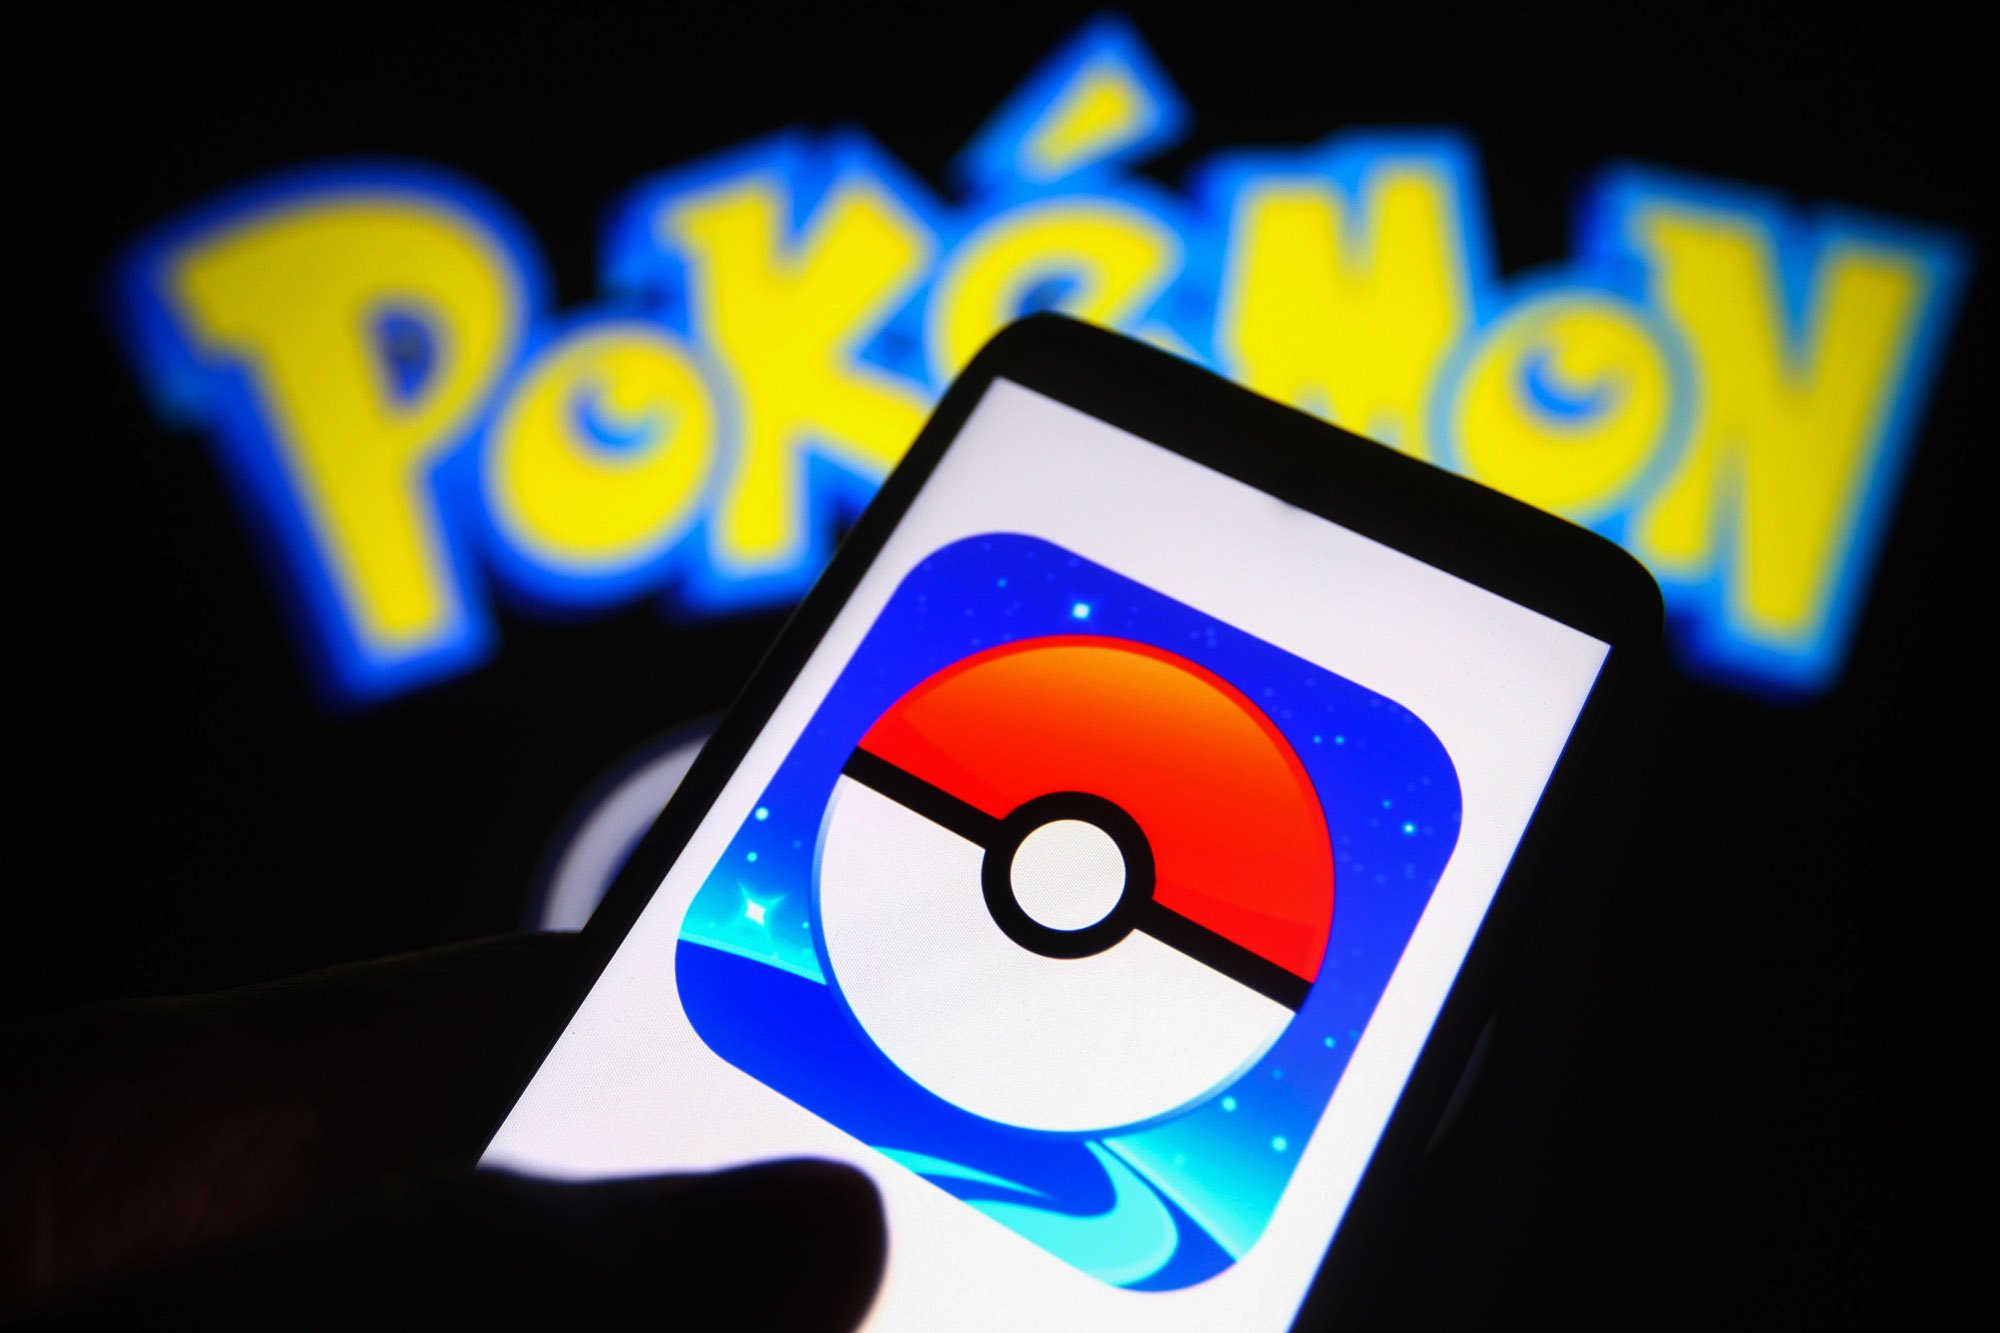 An illustration of a phone with the 'Pokémon GO' app logo on it. In the background, the 'Pokémon' logo is lit up. What will 'Pokémon GO' offer during its Festival of Lights event?